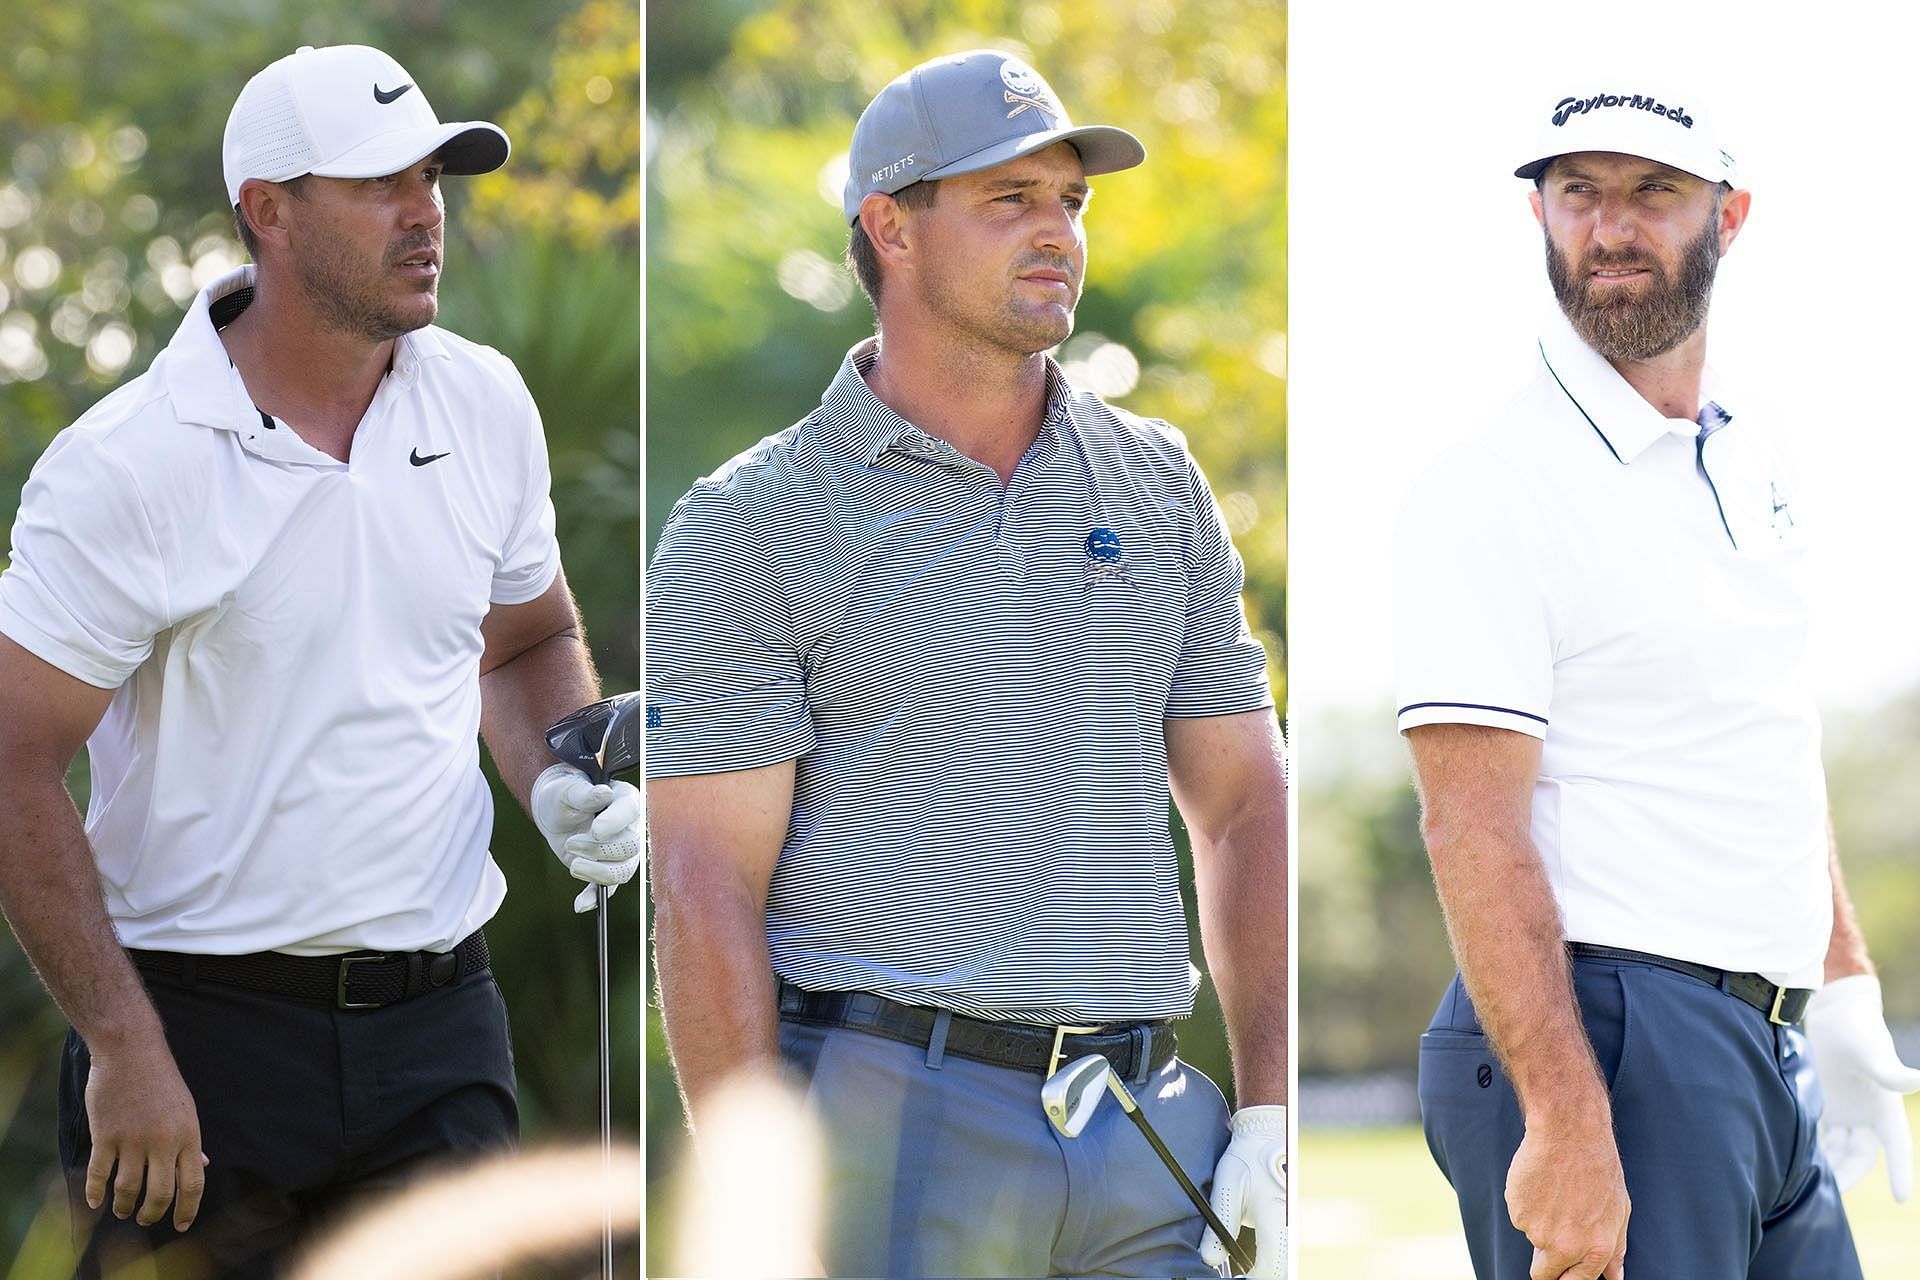 Brooks Koepka, Dustin Johnson and Bryson DeChambeau are in same group for the first round of LIV Golf Tucson event